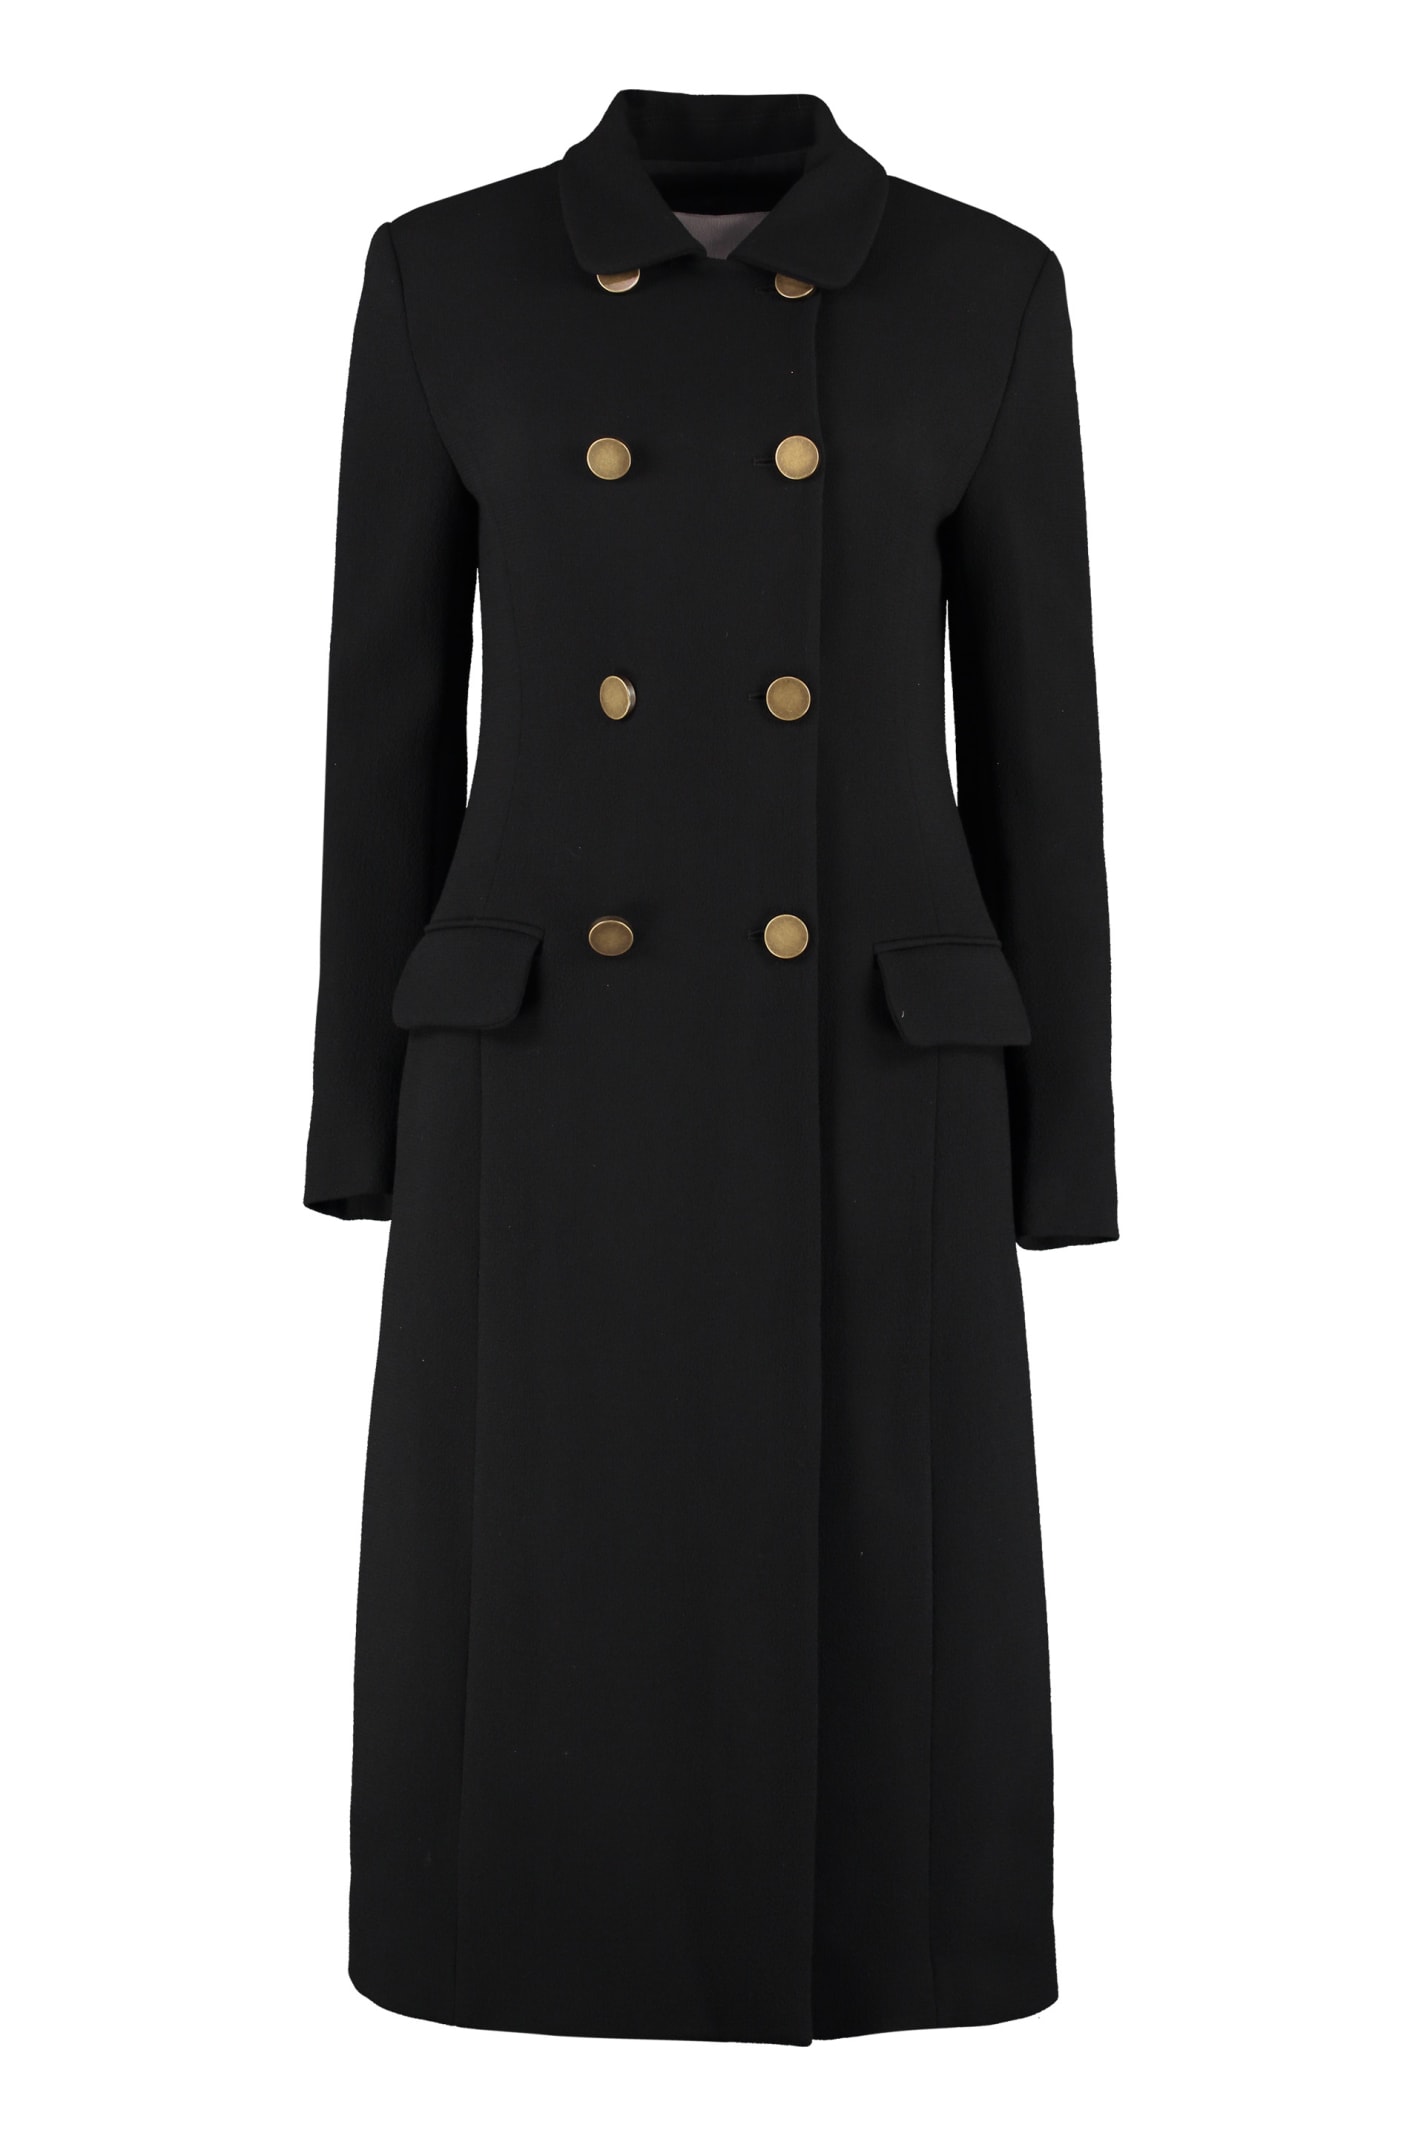 LAutre Chose Double-breasted Wool Coat